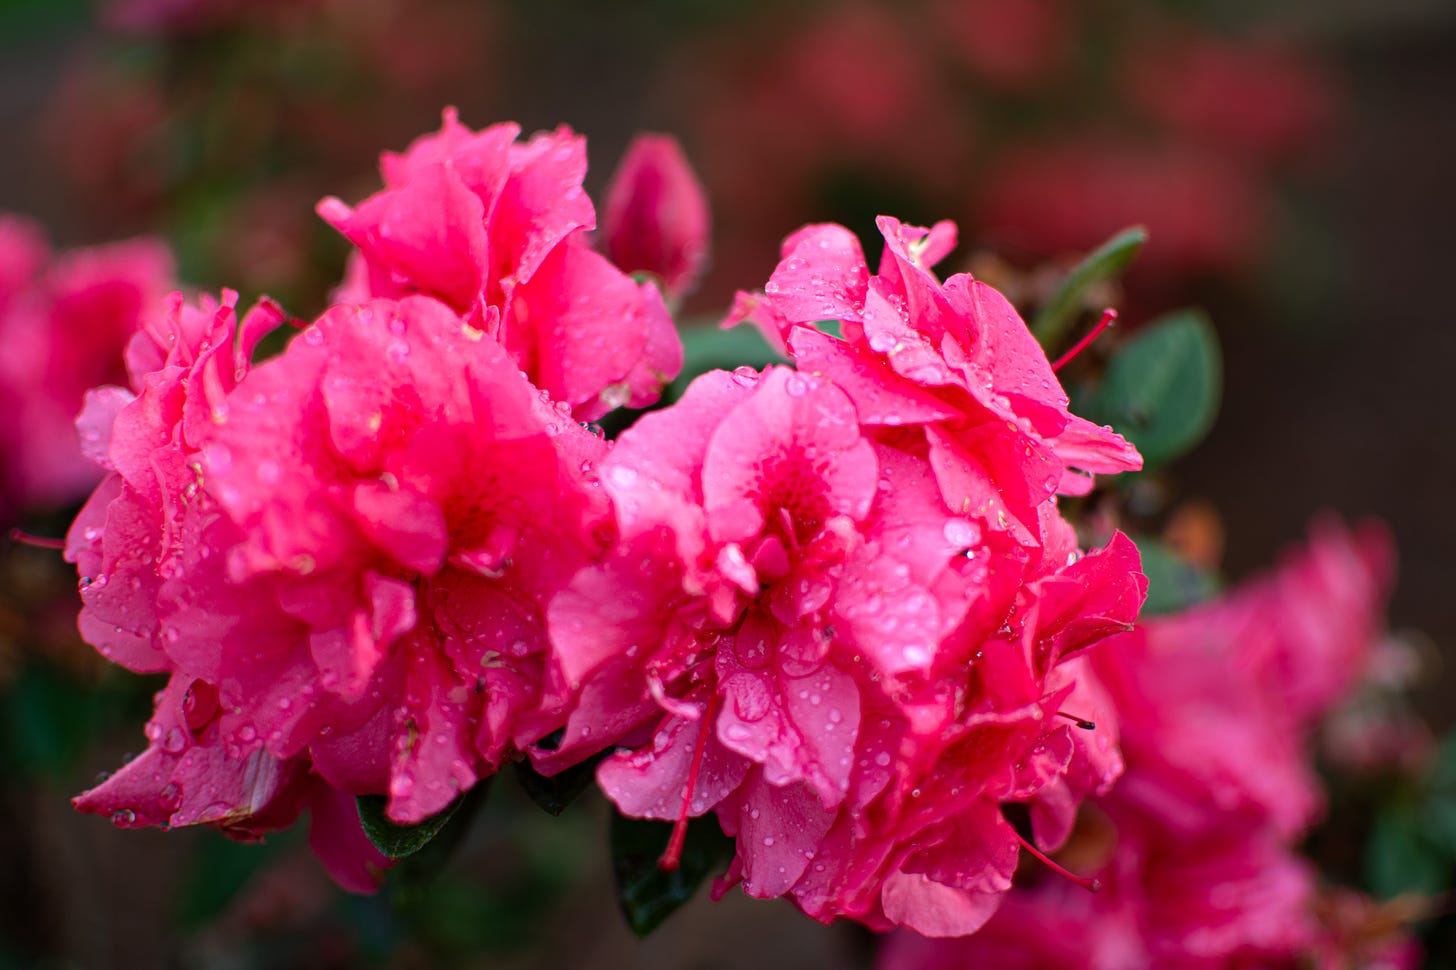 cluster of dark pink azaleas with water drops after the rain agains a dark blurry background